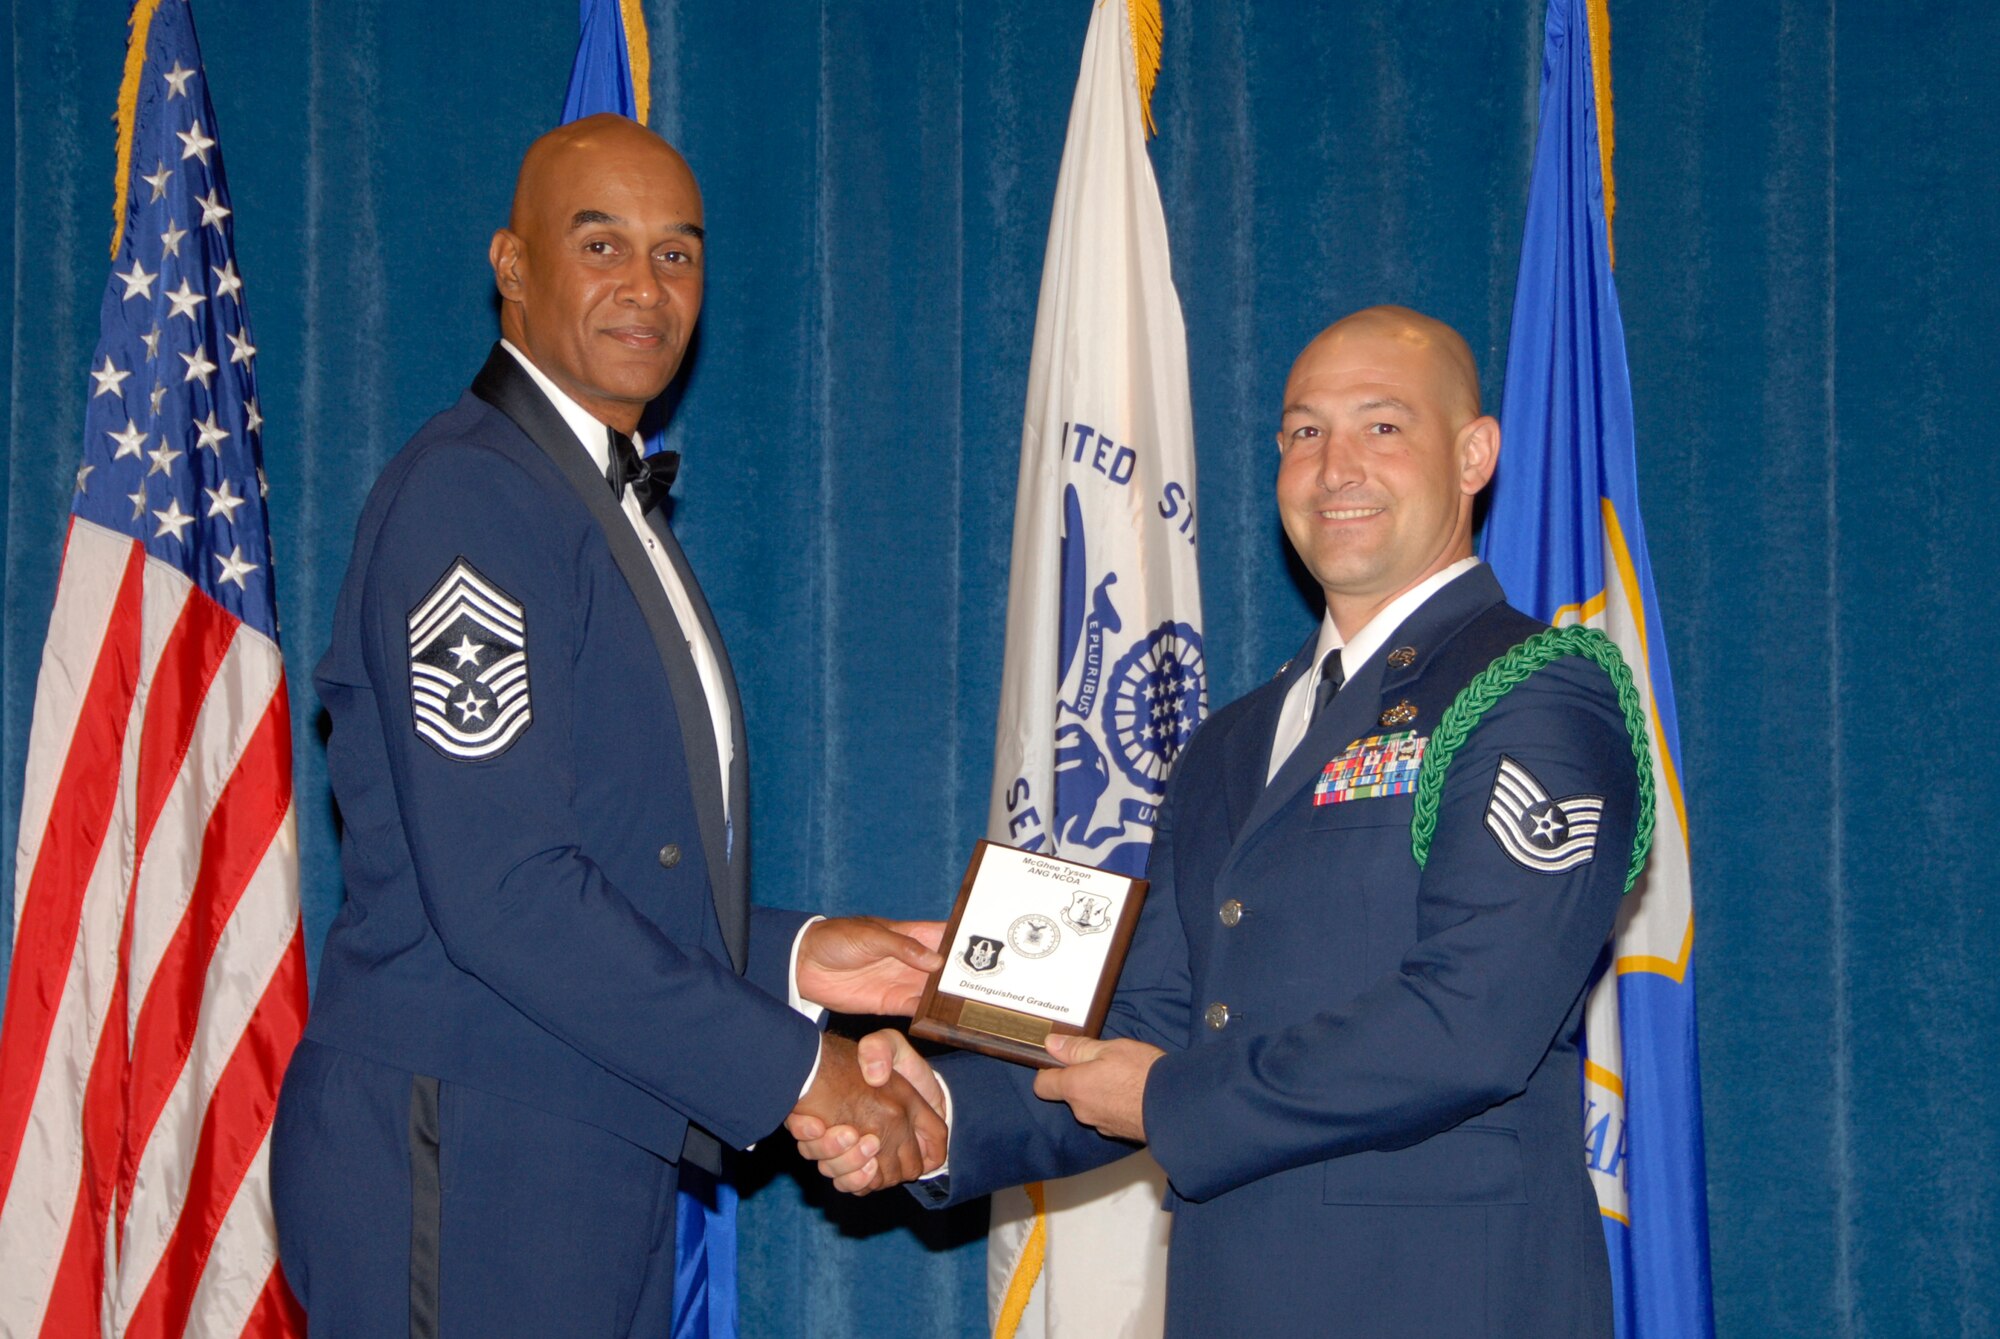 McGHEE TYSON AIR NATIONAL GUARD BASE, Tenn. -- Tech. Sgt. Tyler O. Weisgram, the unit deployment manager for the 49th Civil Engineer Squadron at Holloman AFB, N.M., receives the Distinguished Graduate Award for NCO Academy Class 09-6 at The Air National Guard Training and Education Center here from Chief Master Sgt. Leroy Frink, Sept. 30, 2009.  The Distinguished Graduate Award is presented to students in the top ten percent of the class.  It is based on objective and performance evaluations, demonstrated leadership, and performance as a team player.   (U.S. Air Force photo by Master Sgt. Kurt Skoglund)